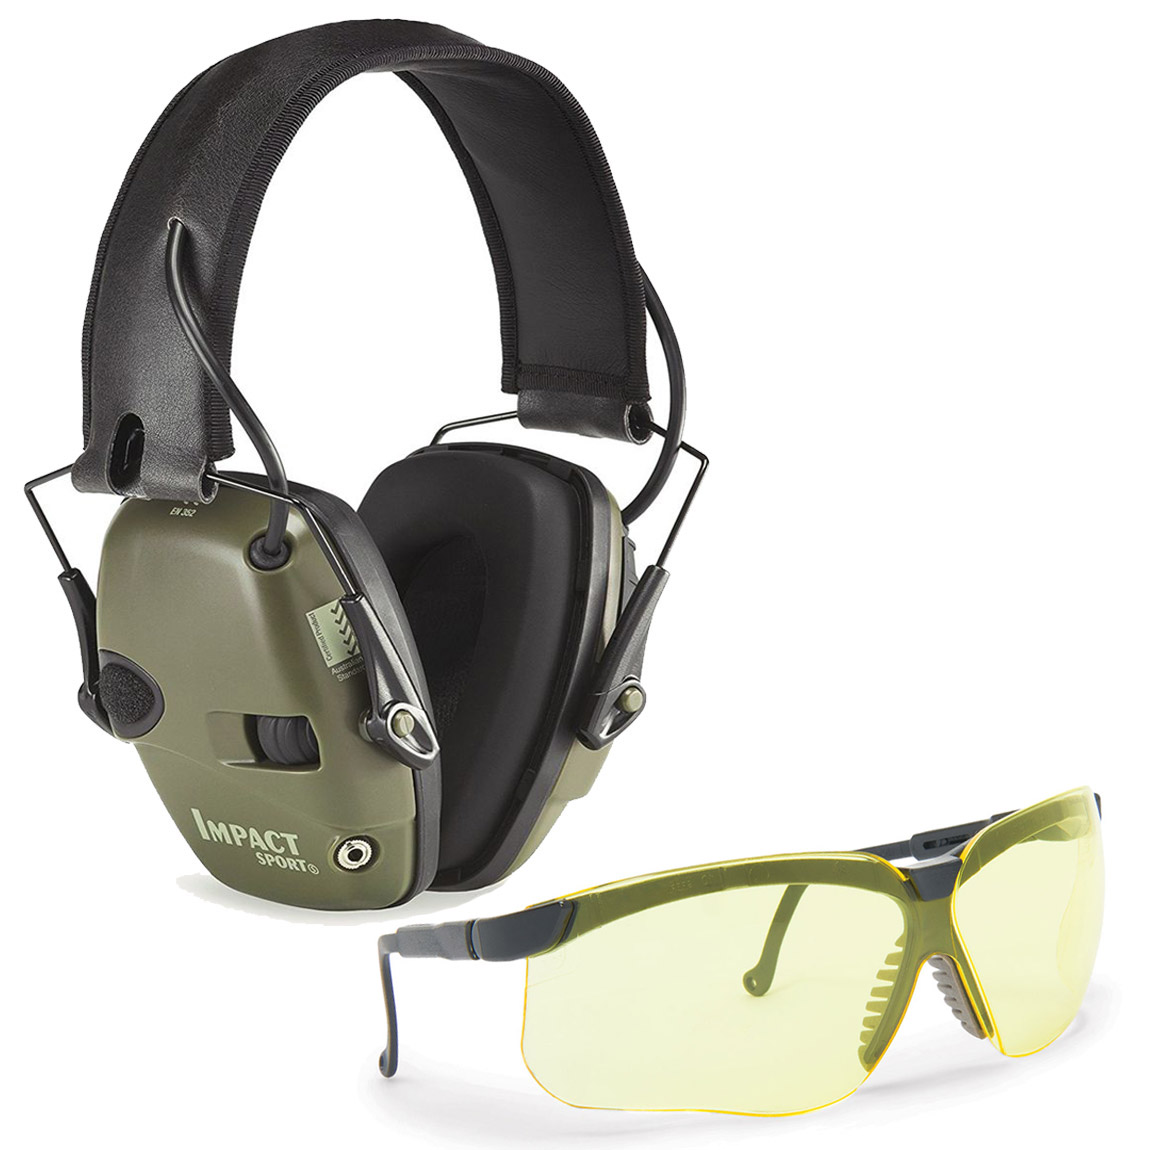 https://www.greatbrandsoutlet.com/store/images/products/large_images/shooters-bundle-4-howard-leight-ear-and-eye-protection.jpg